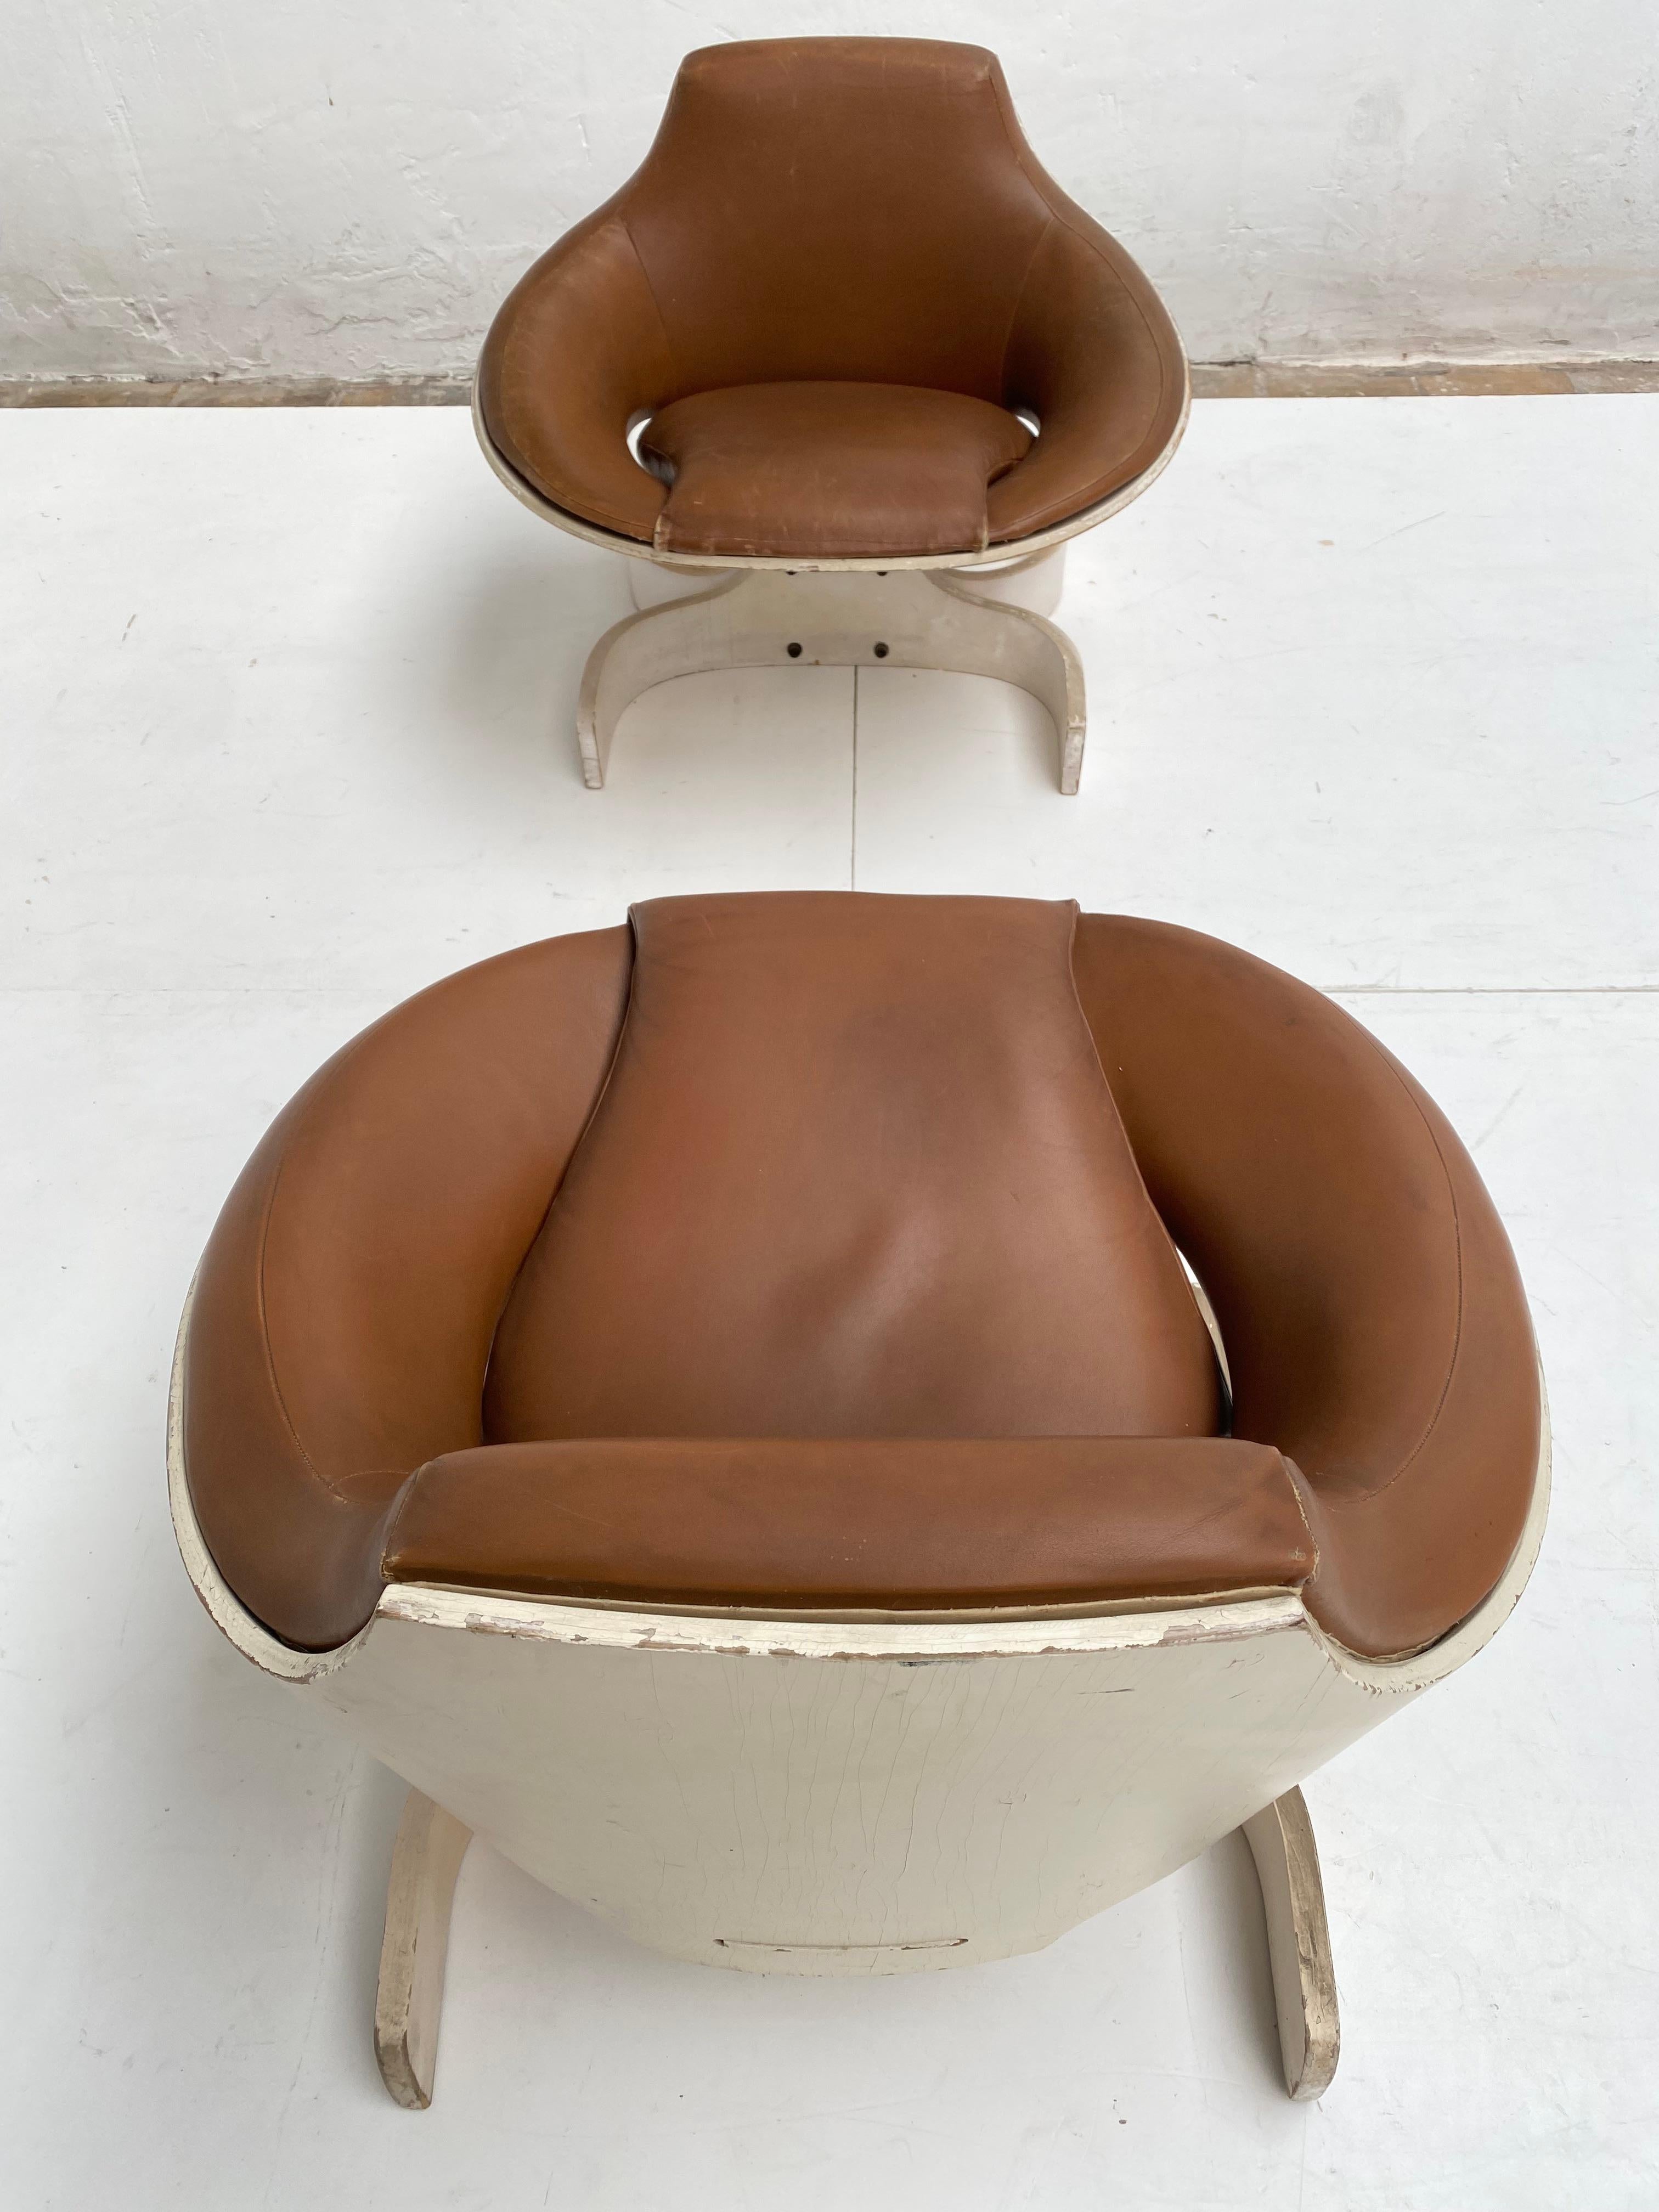 Super Rare Pair of Joe Colombo 'Sella 1001' Lounge Chairs by Comfort 1963 Italy For Sale 13